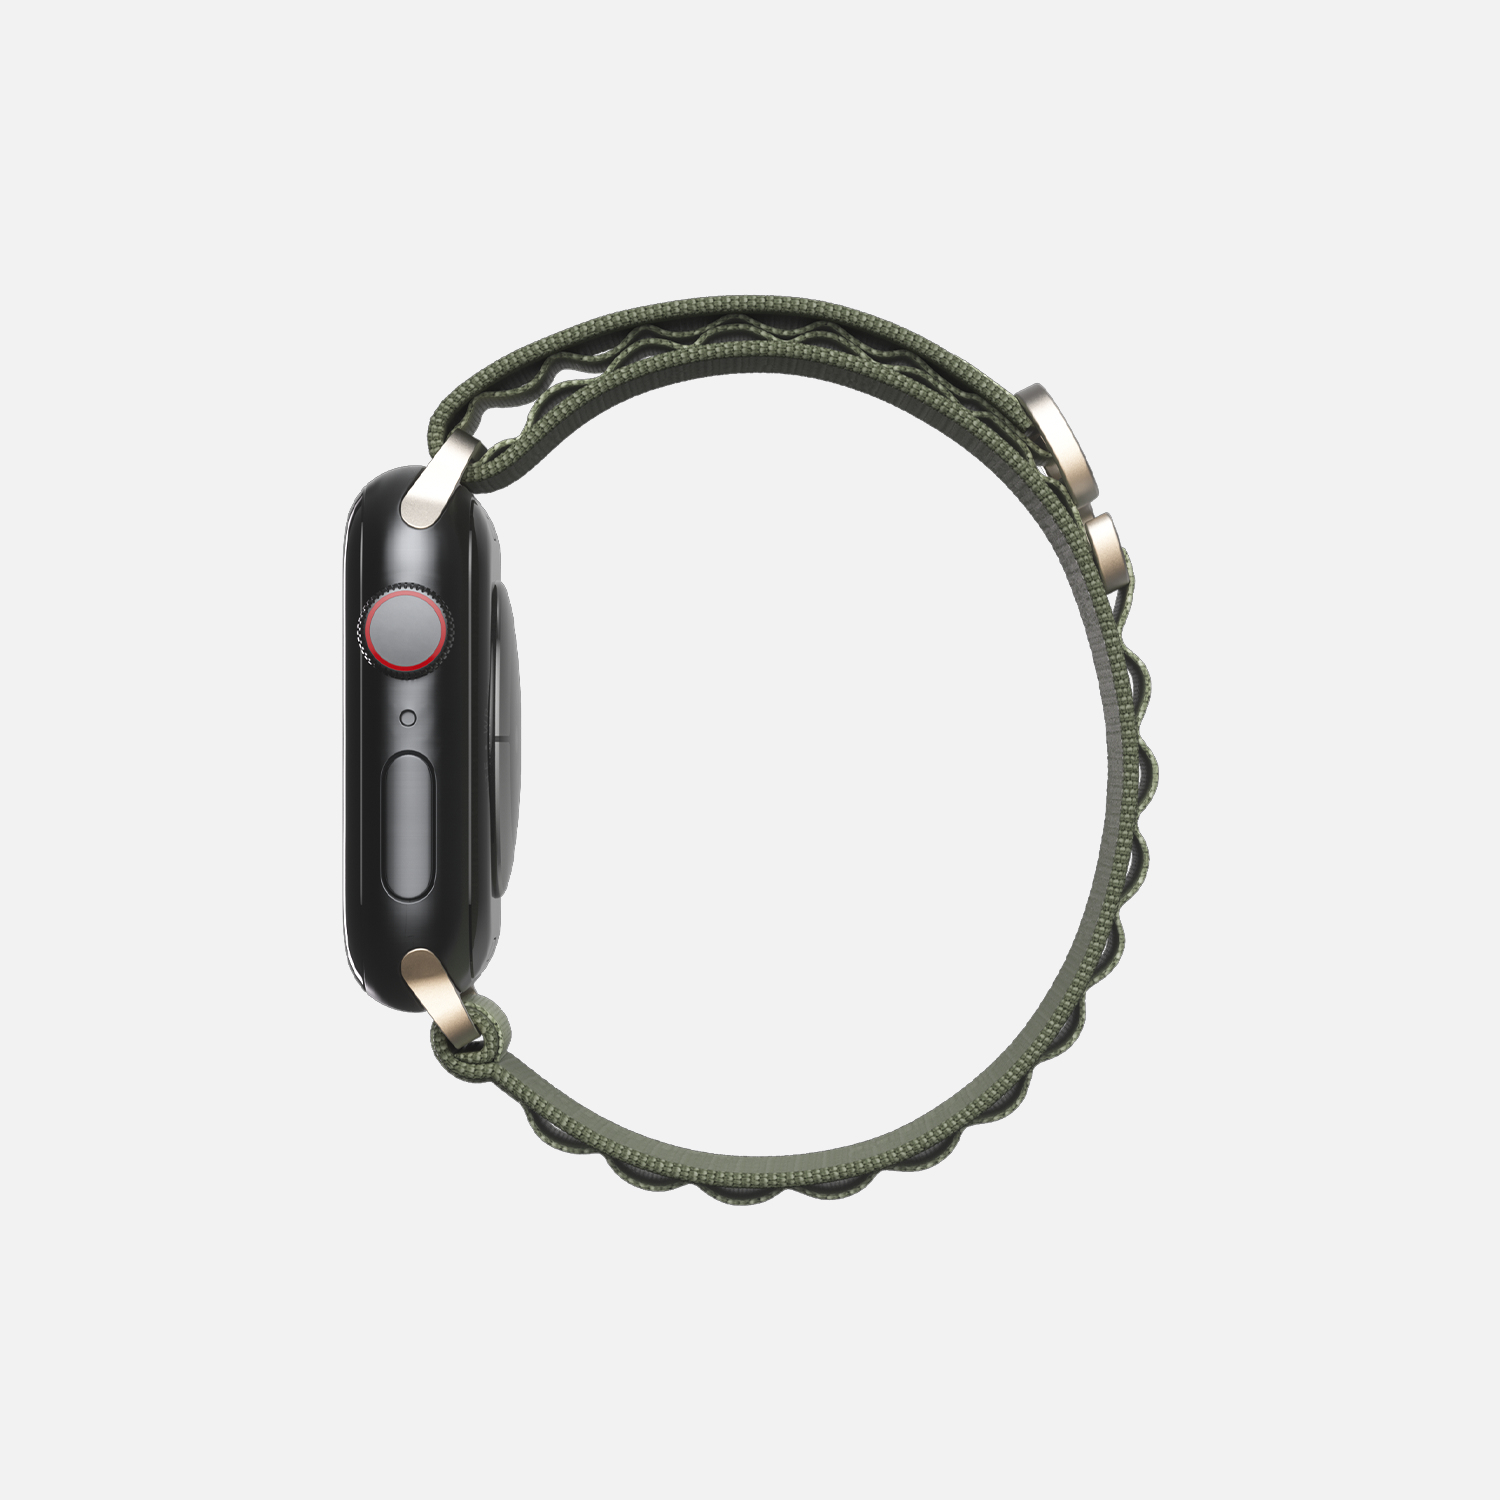 Side view of a green sage loop band on smartwatch with red-accented digital crown, side button, and aluminum case.